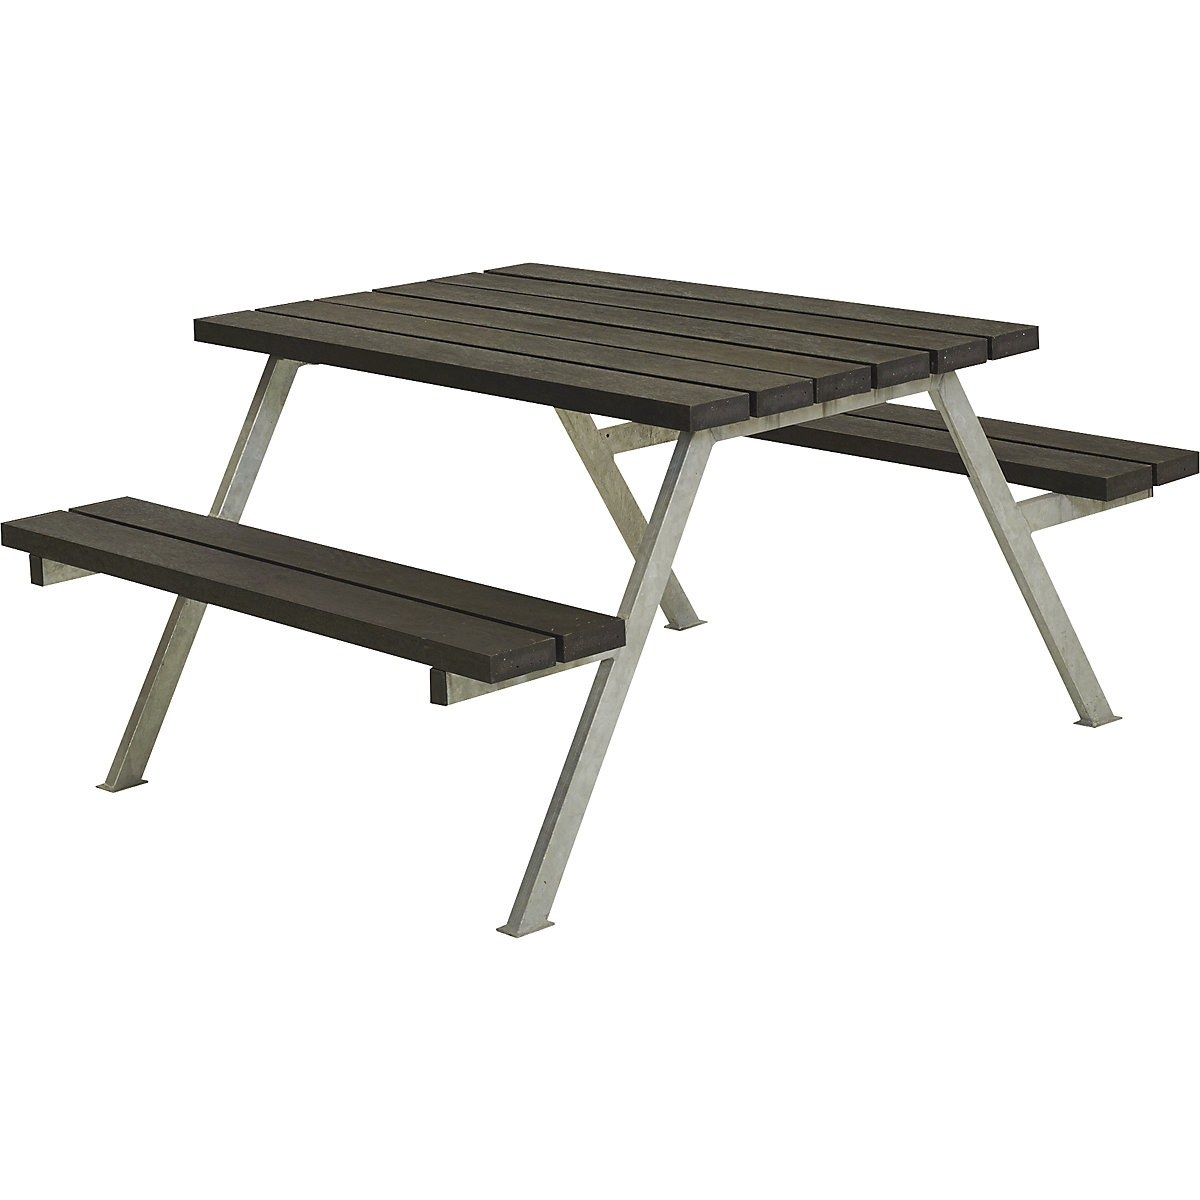 Picnic bench for 4 people